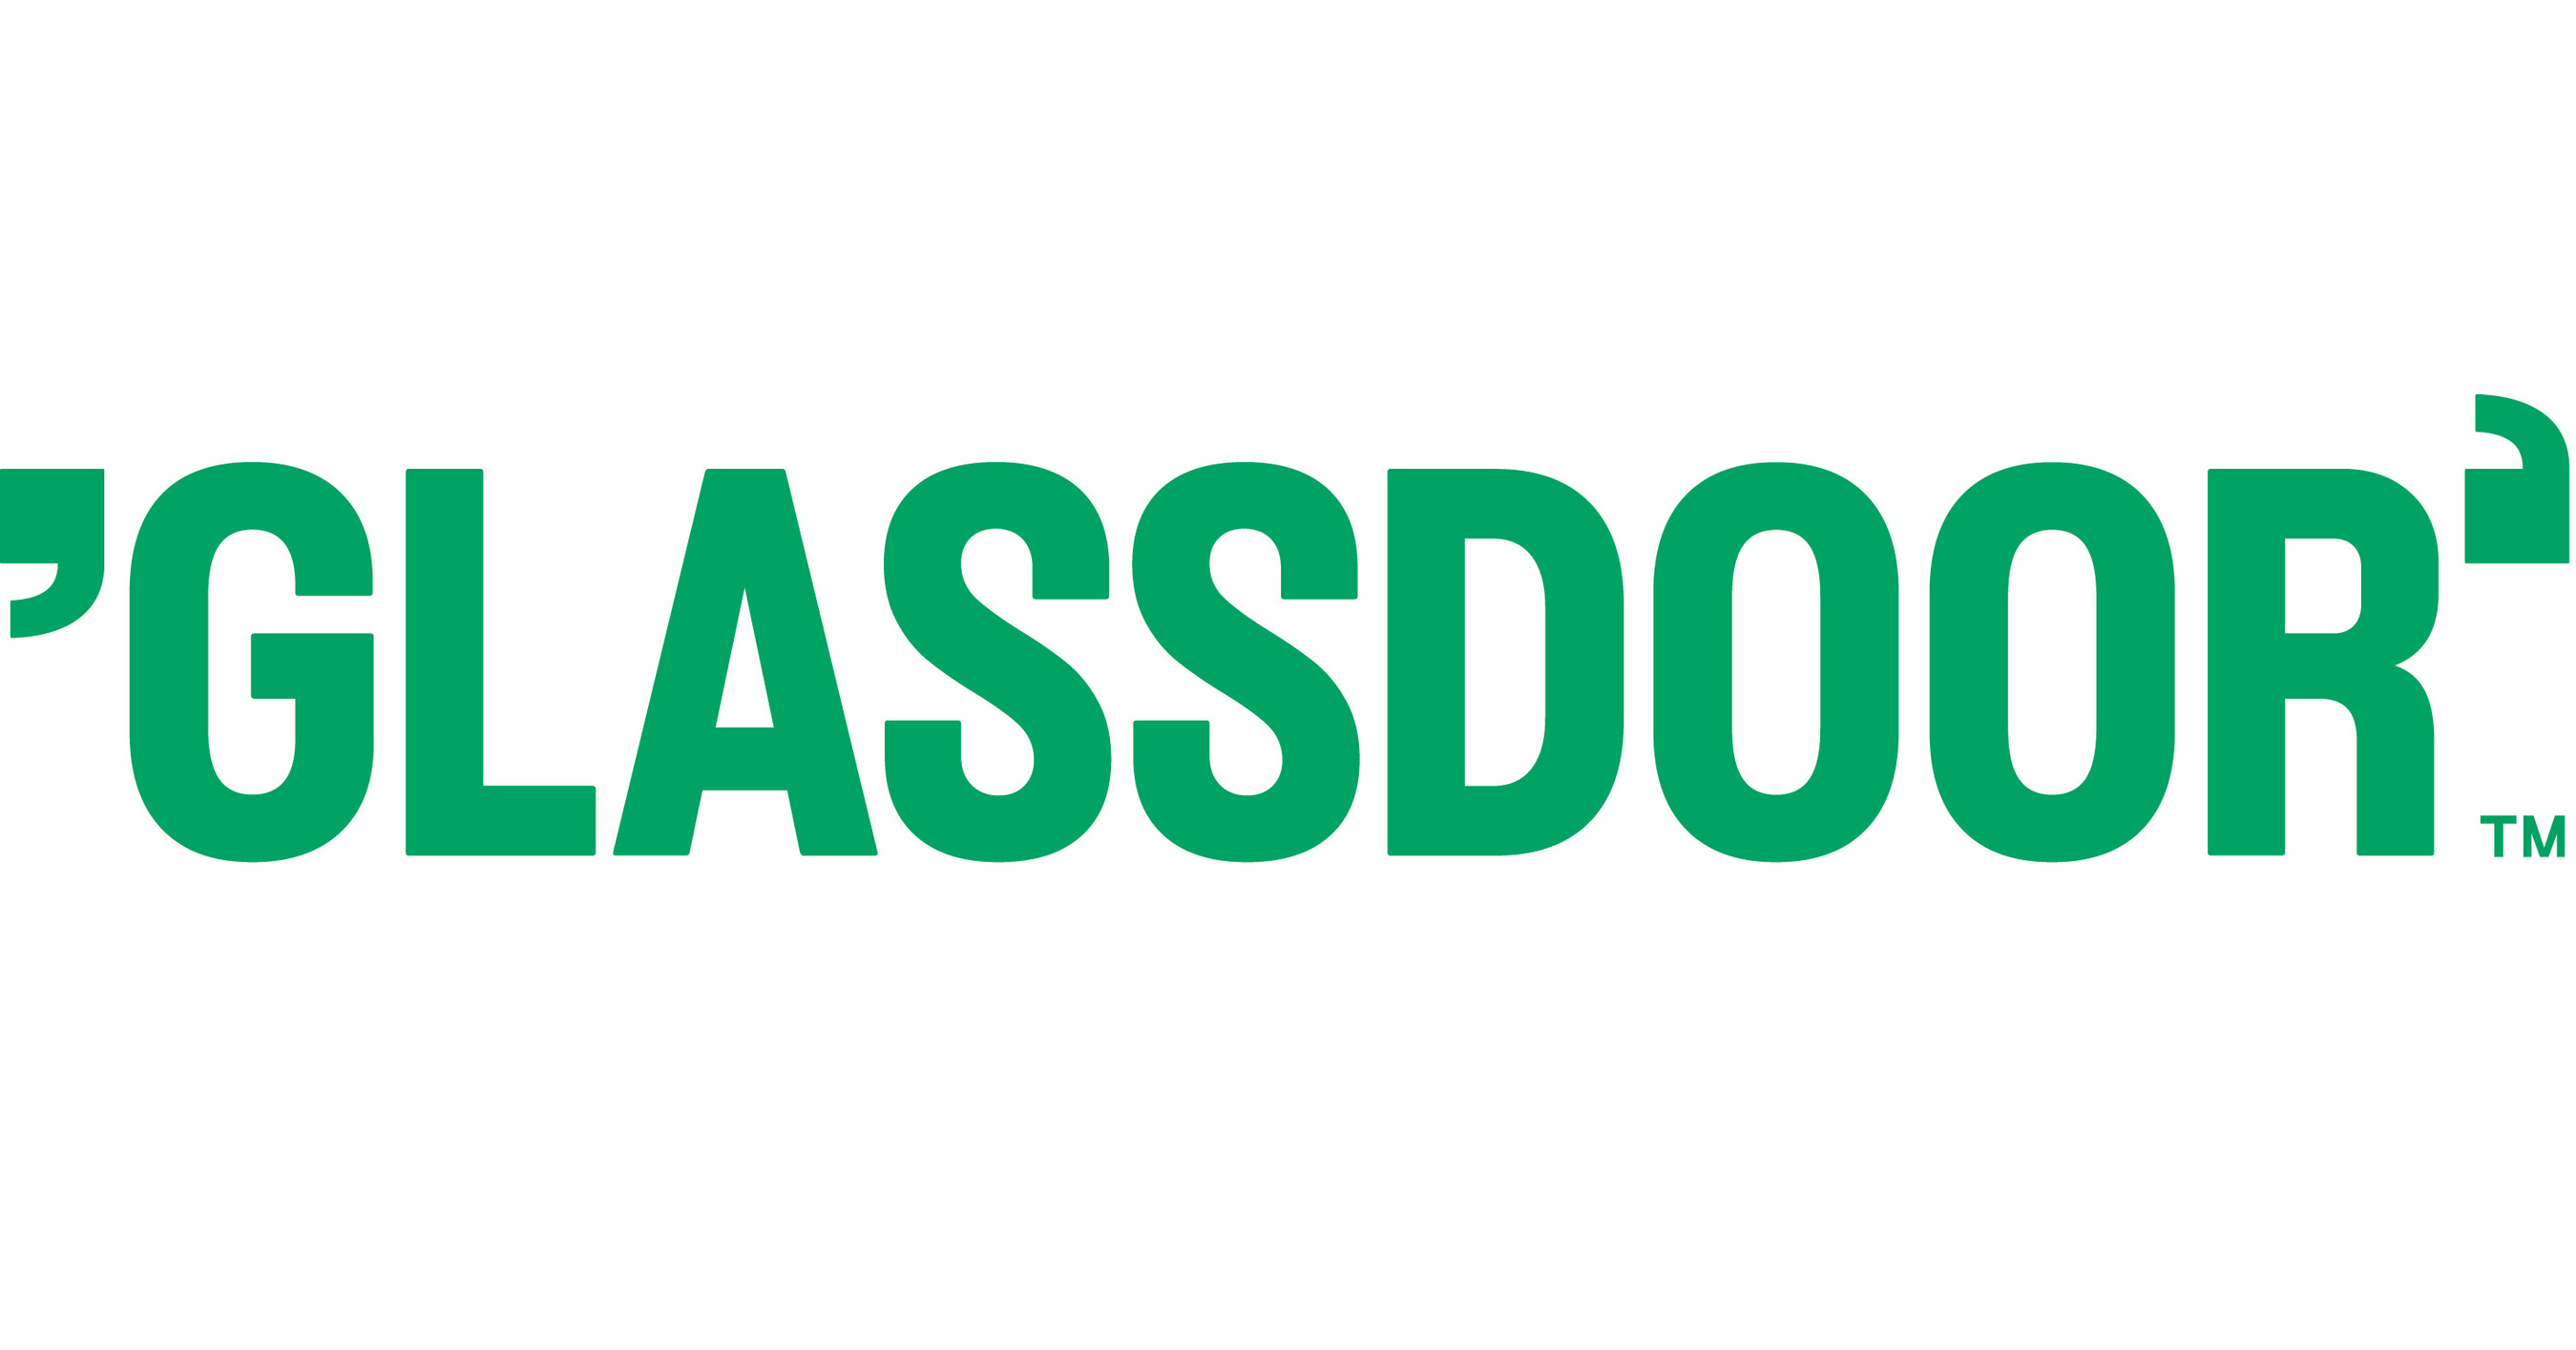 Glassdoor Survey Finds More Employees Expected To Quit In Upcoming Year With Salary Cited As Top Reason